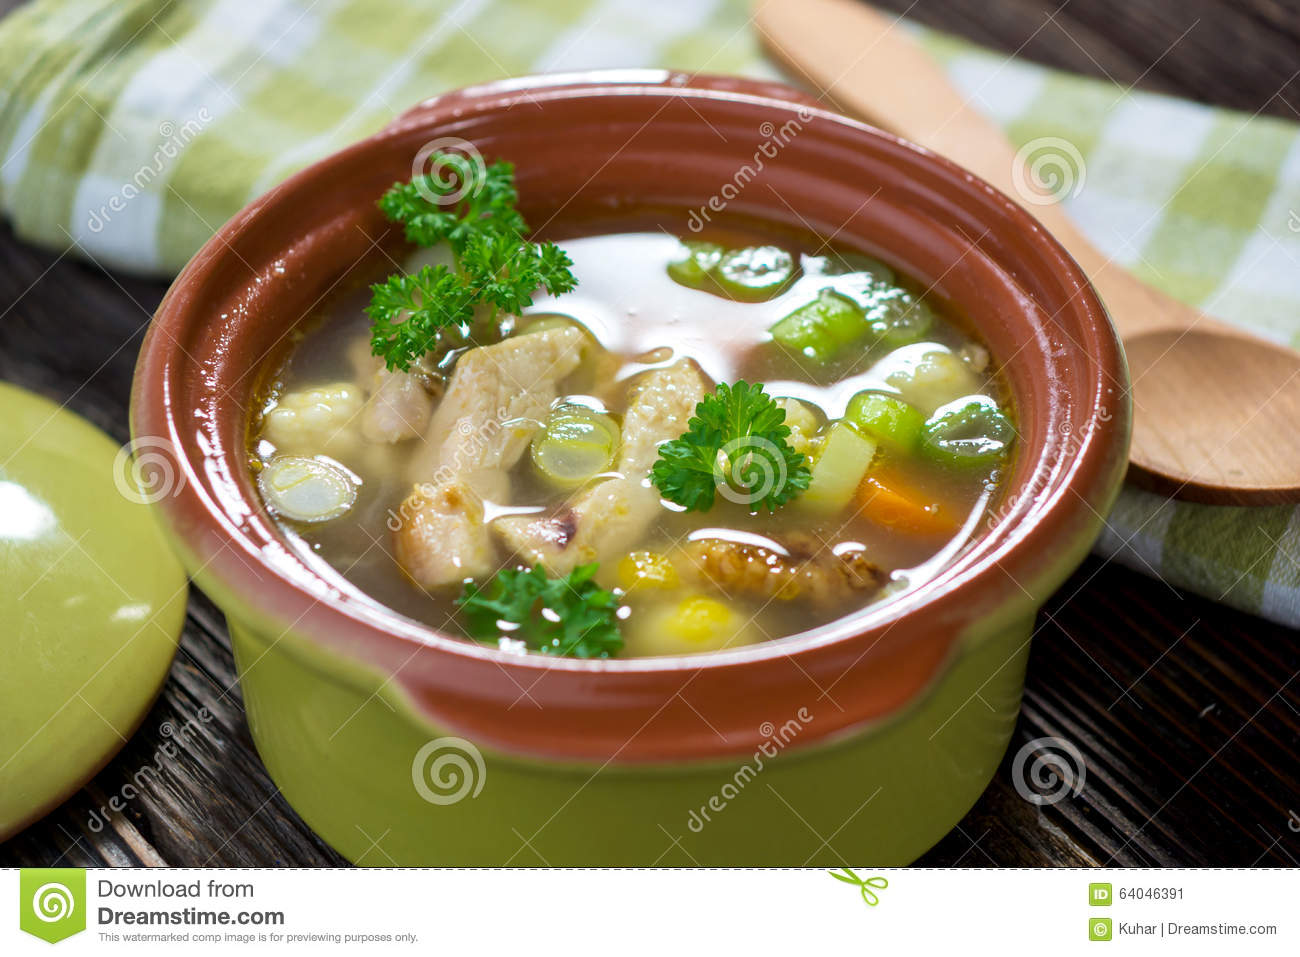 Chicken Soup Stock Photo   Image  64046391